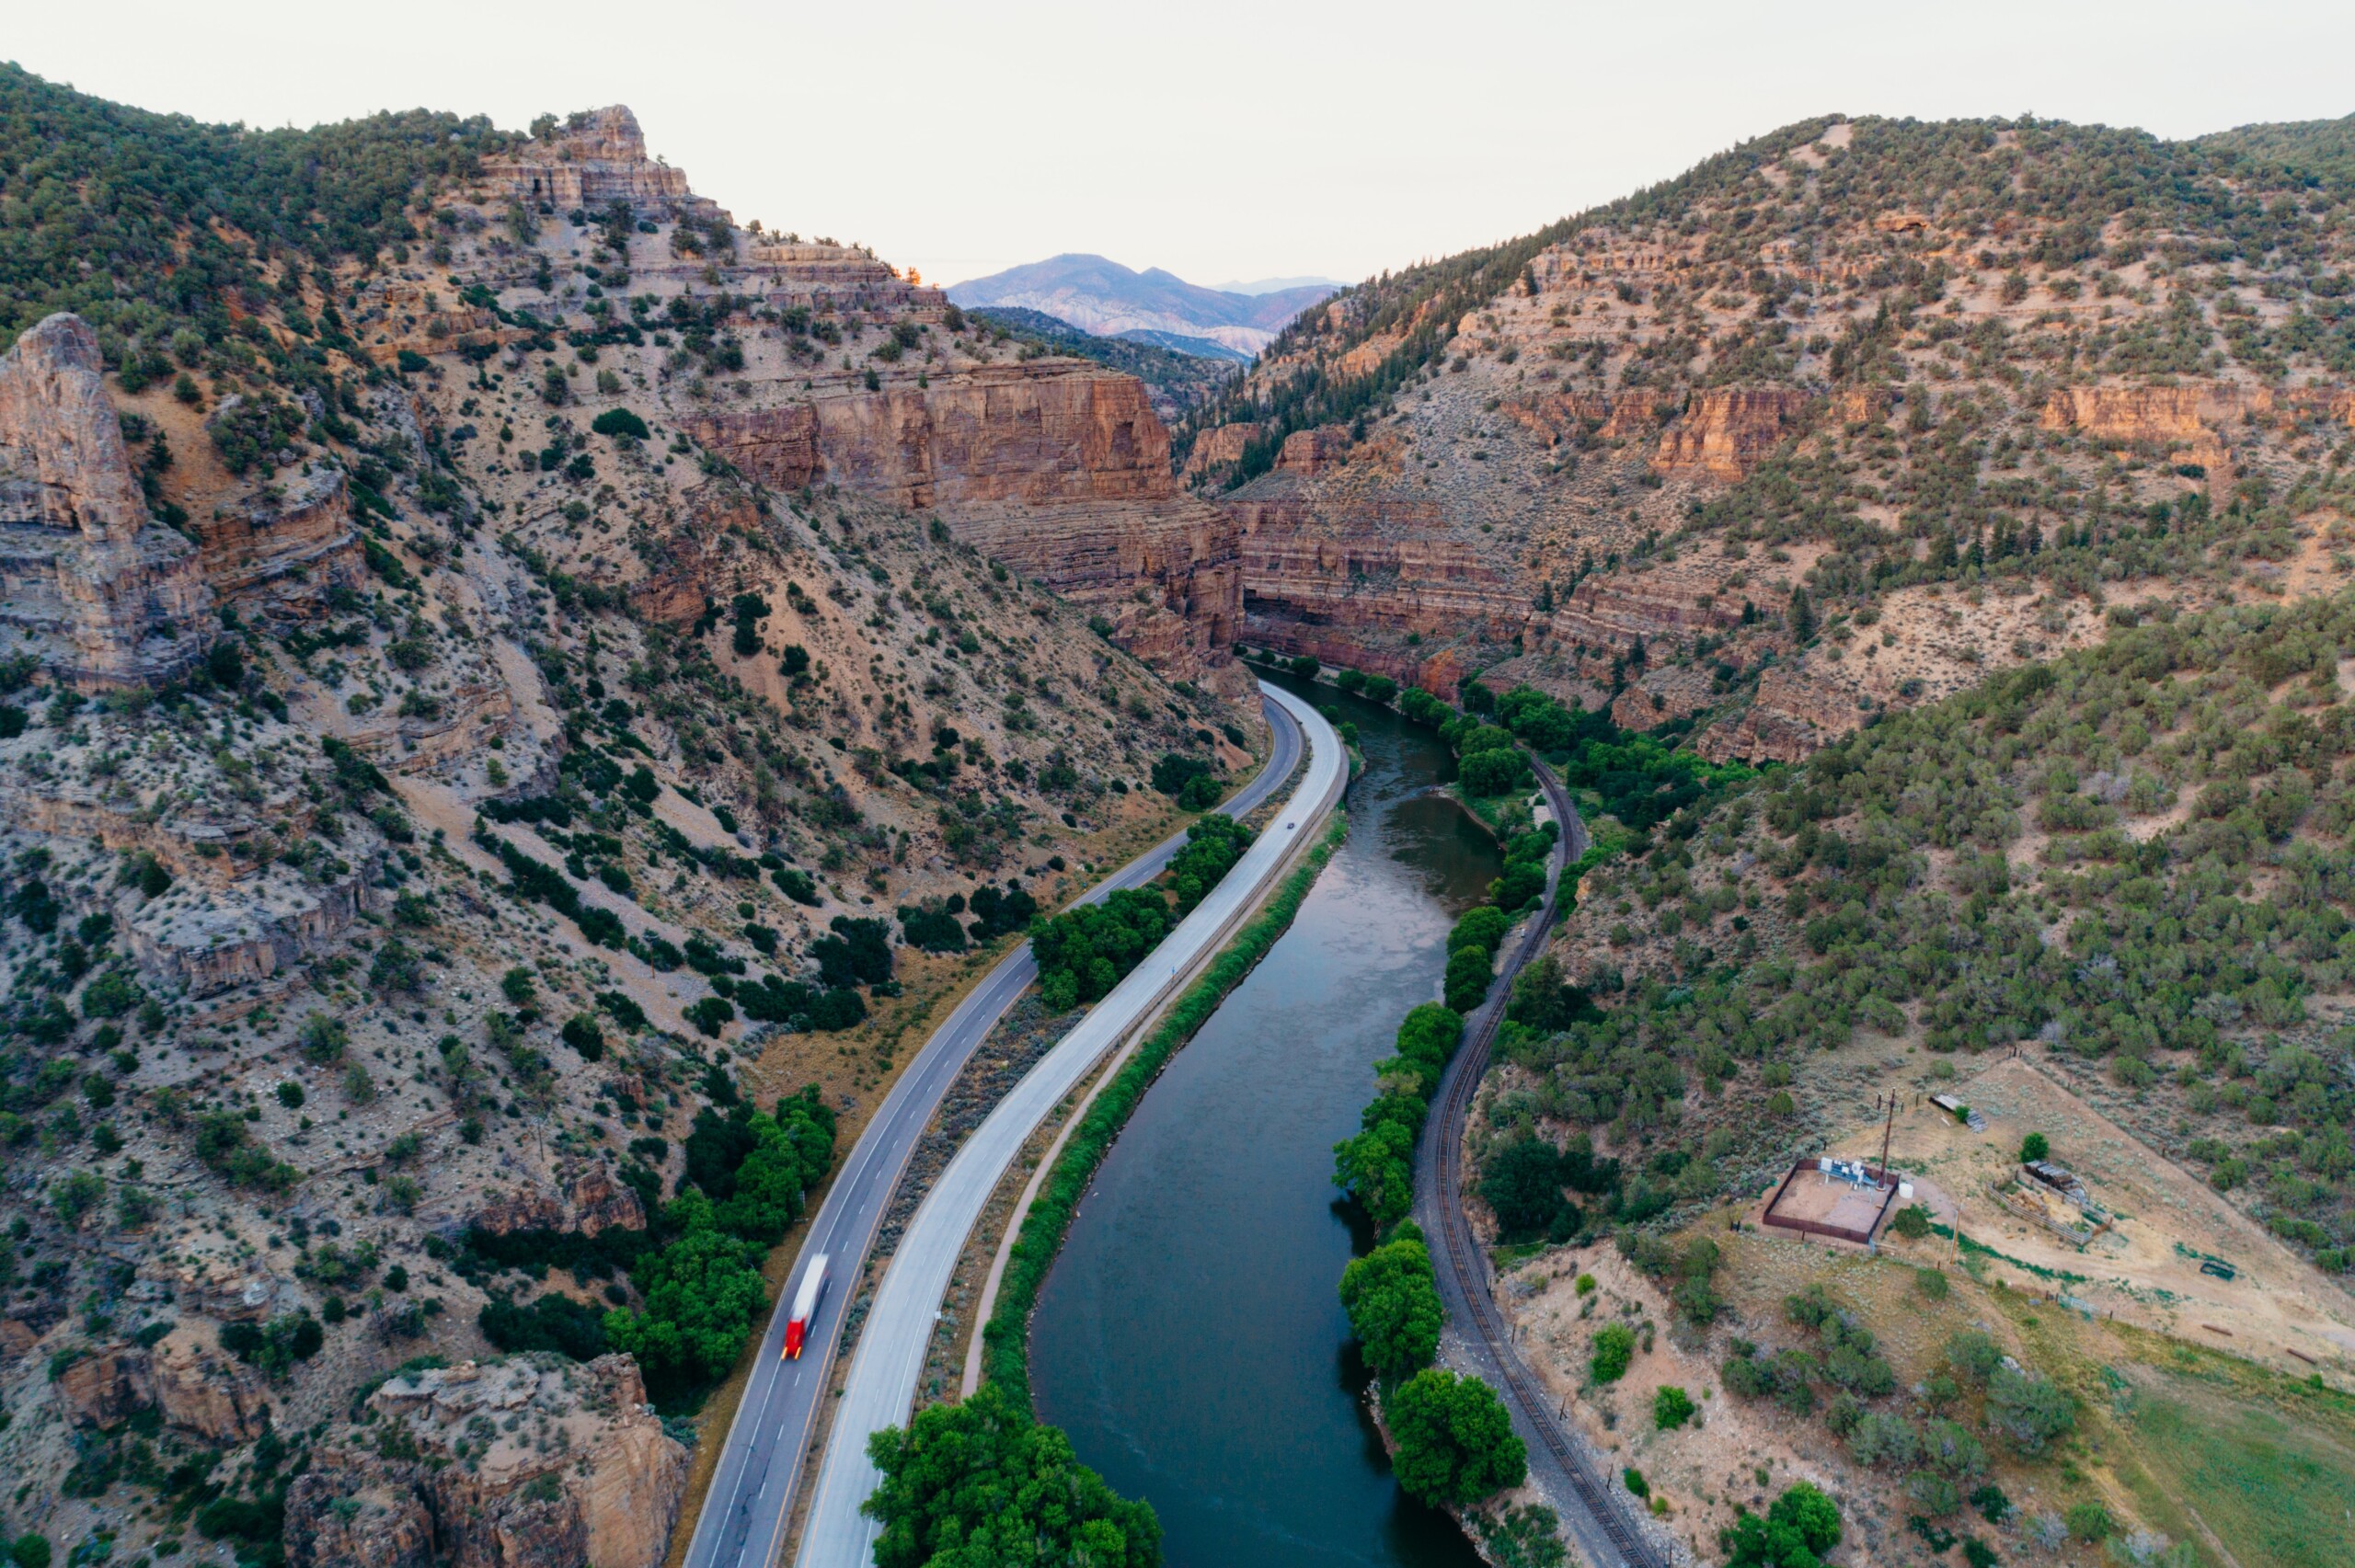 Water Policies to Provide Crucial Benefits for Colorado Streams and Communities